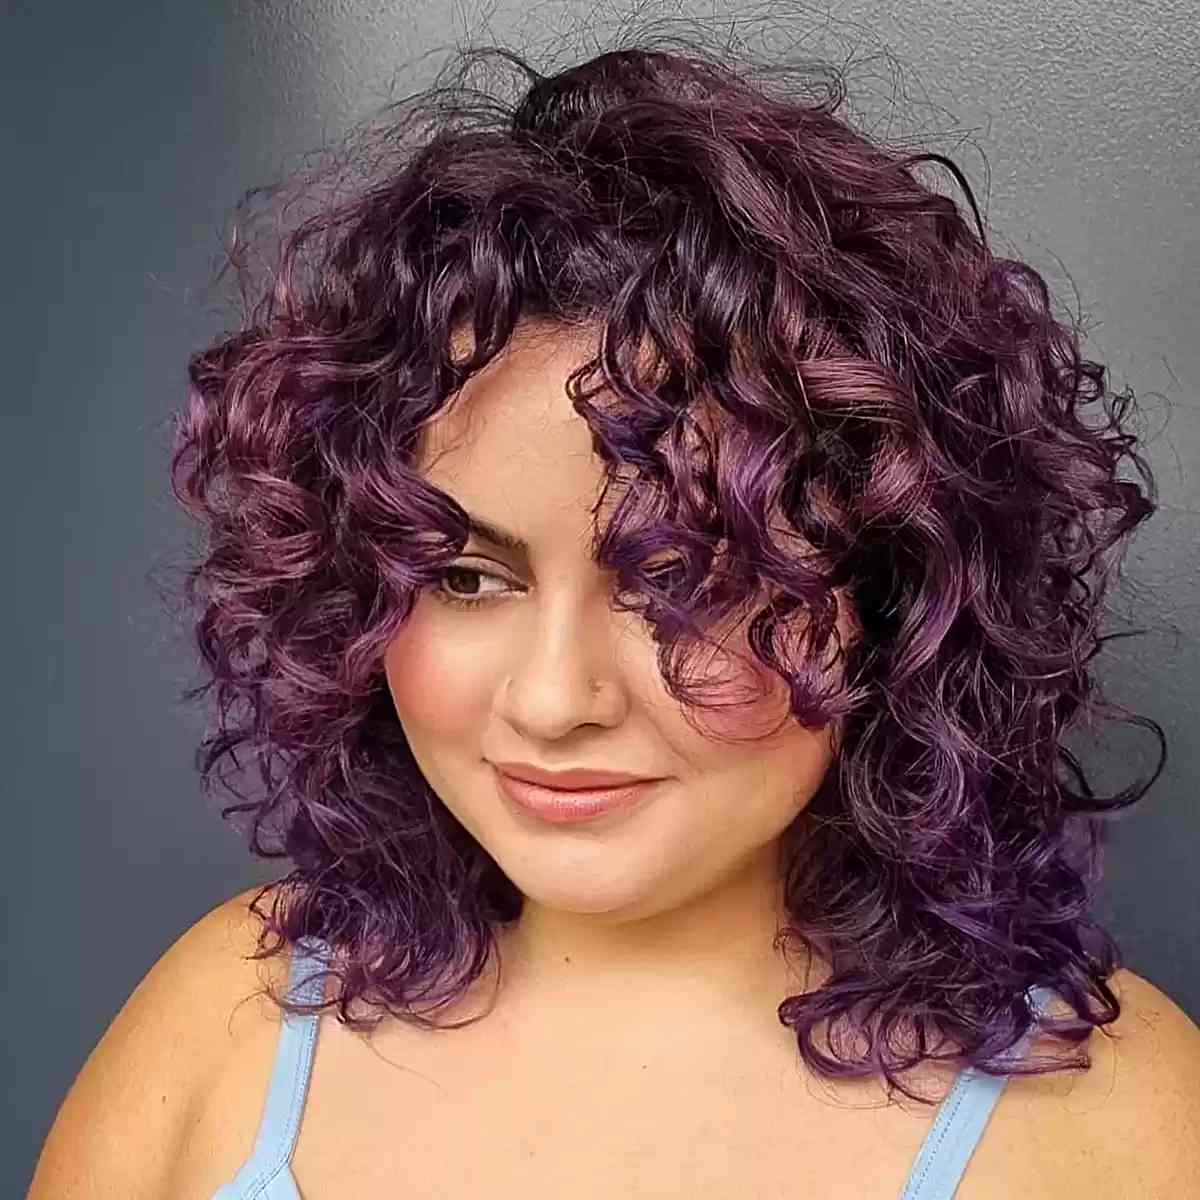 Funky Purple Curls for ladies with round faces and shoulder-length hair